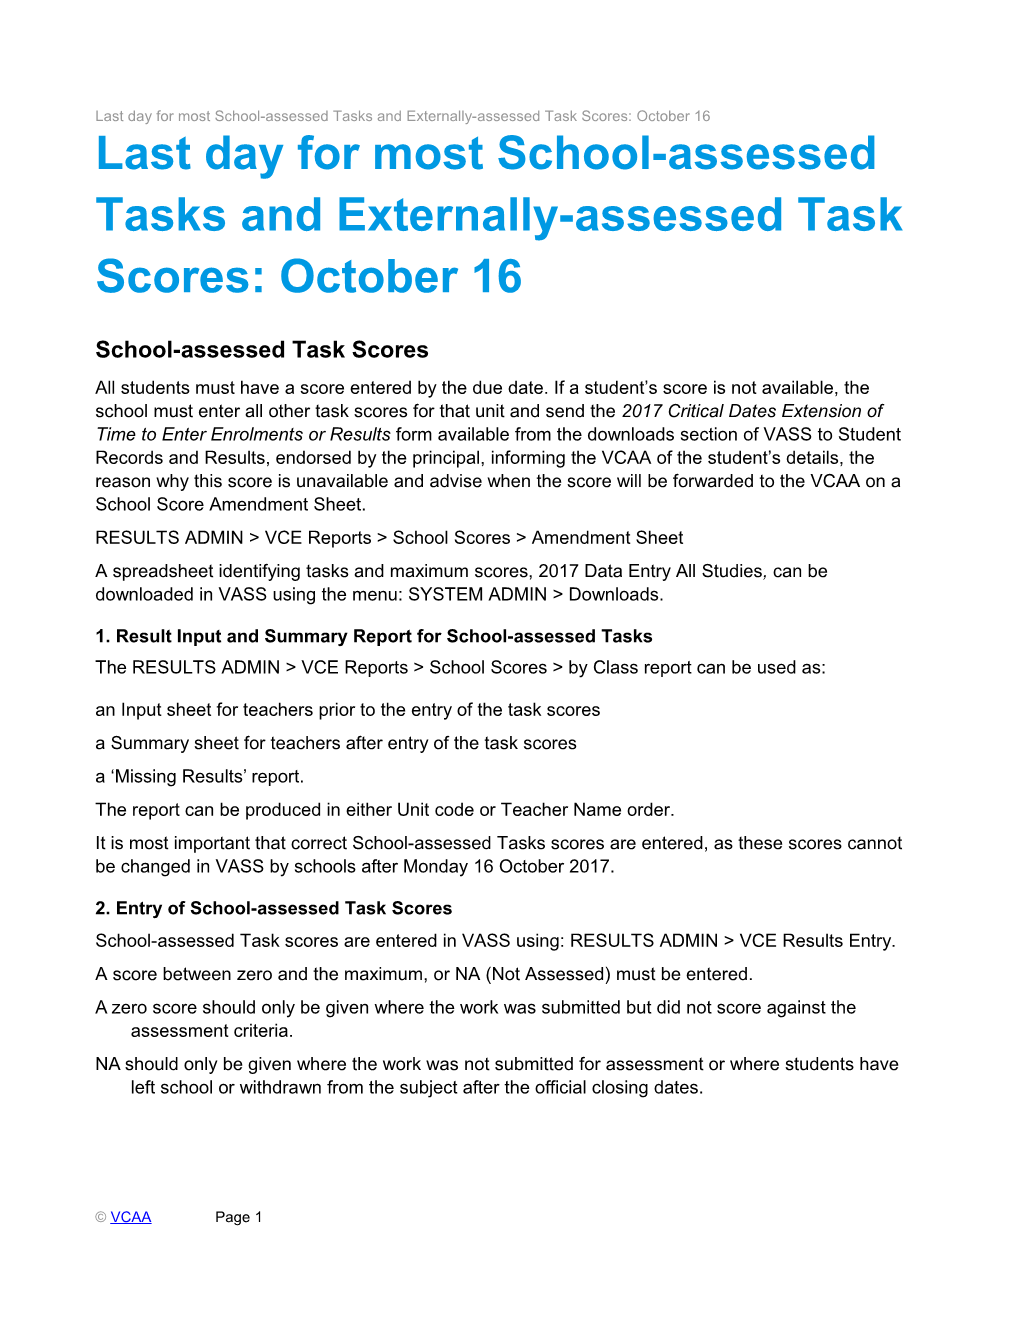 Last Day for Most School-Assessed Tasks and Externally-Assessed Task Scores: October 16